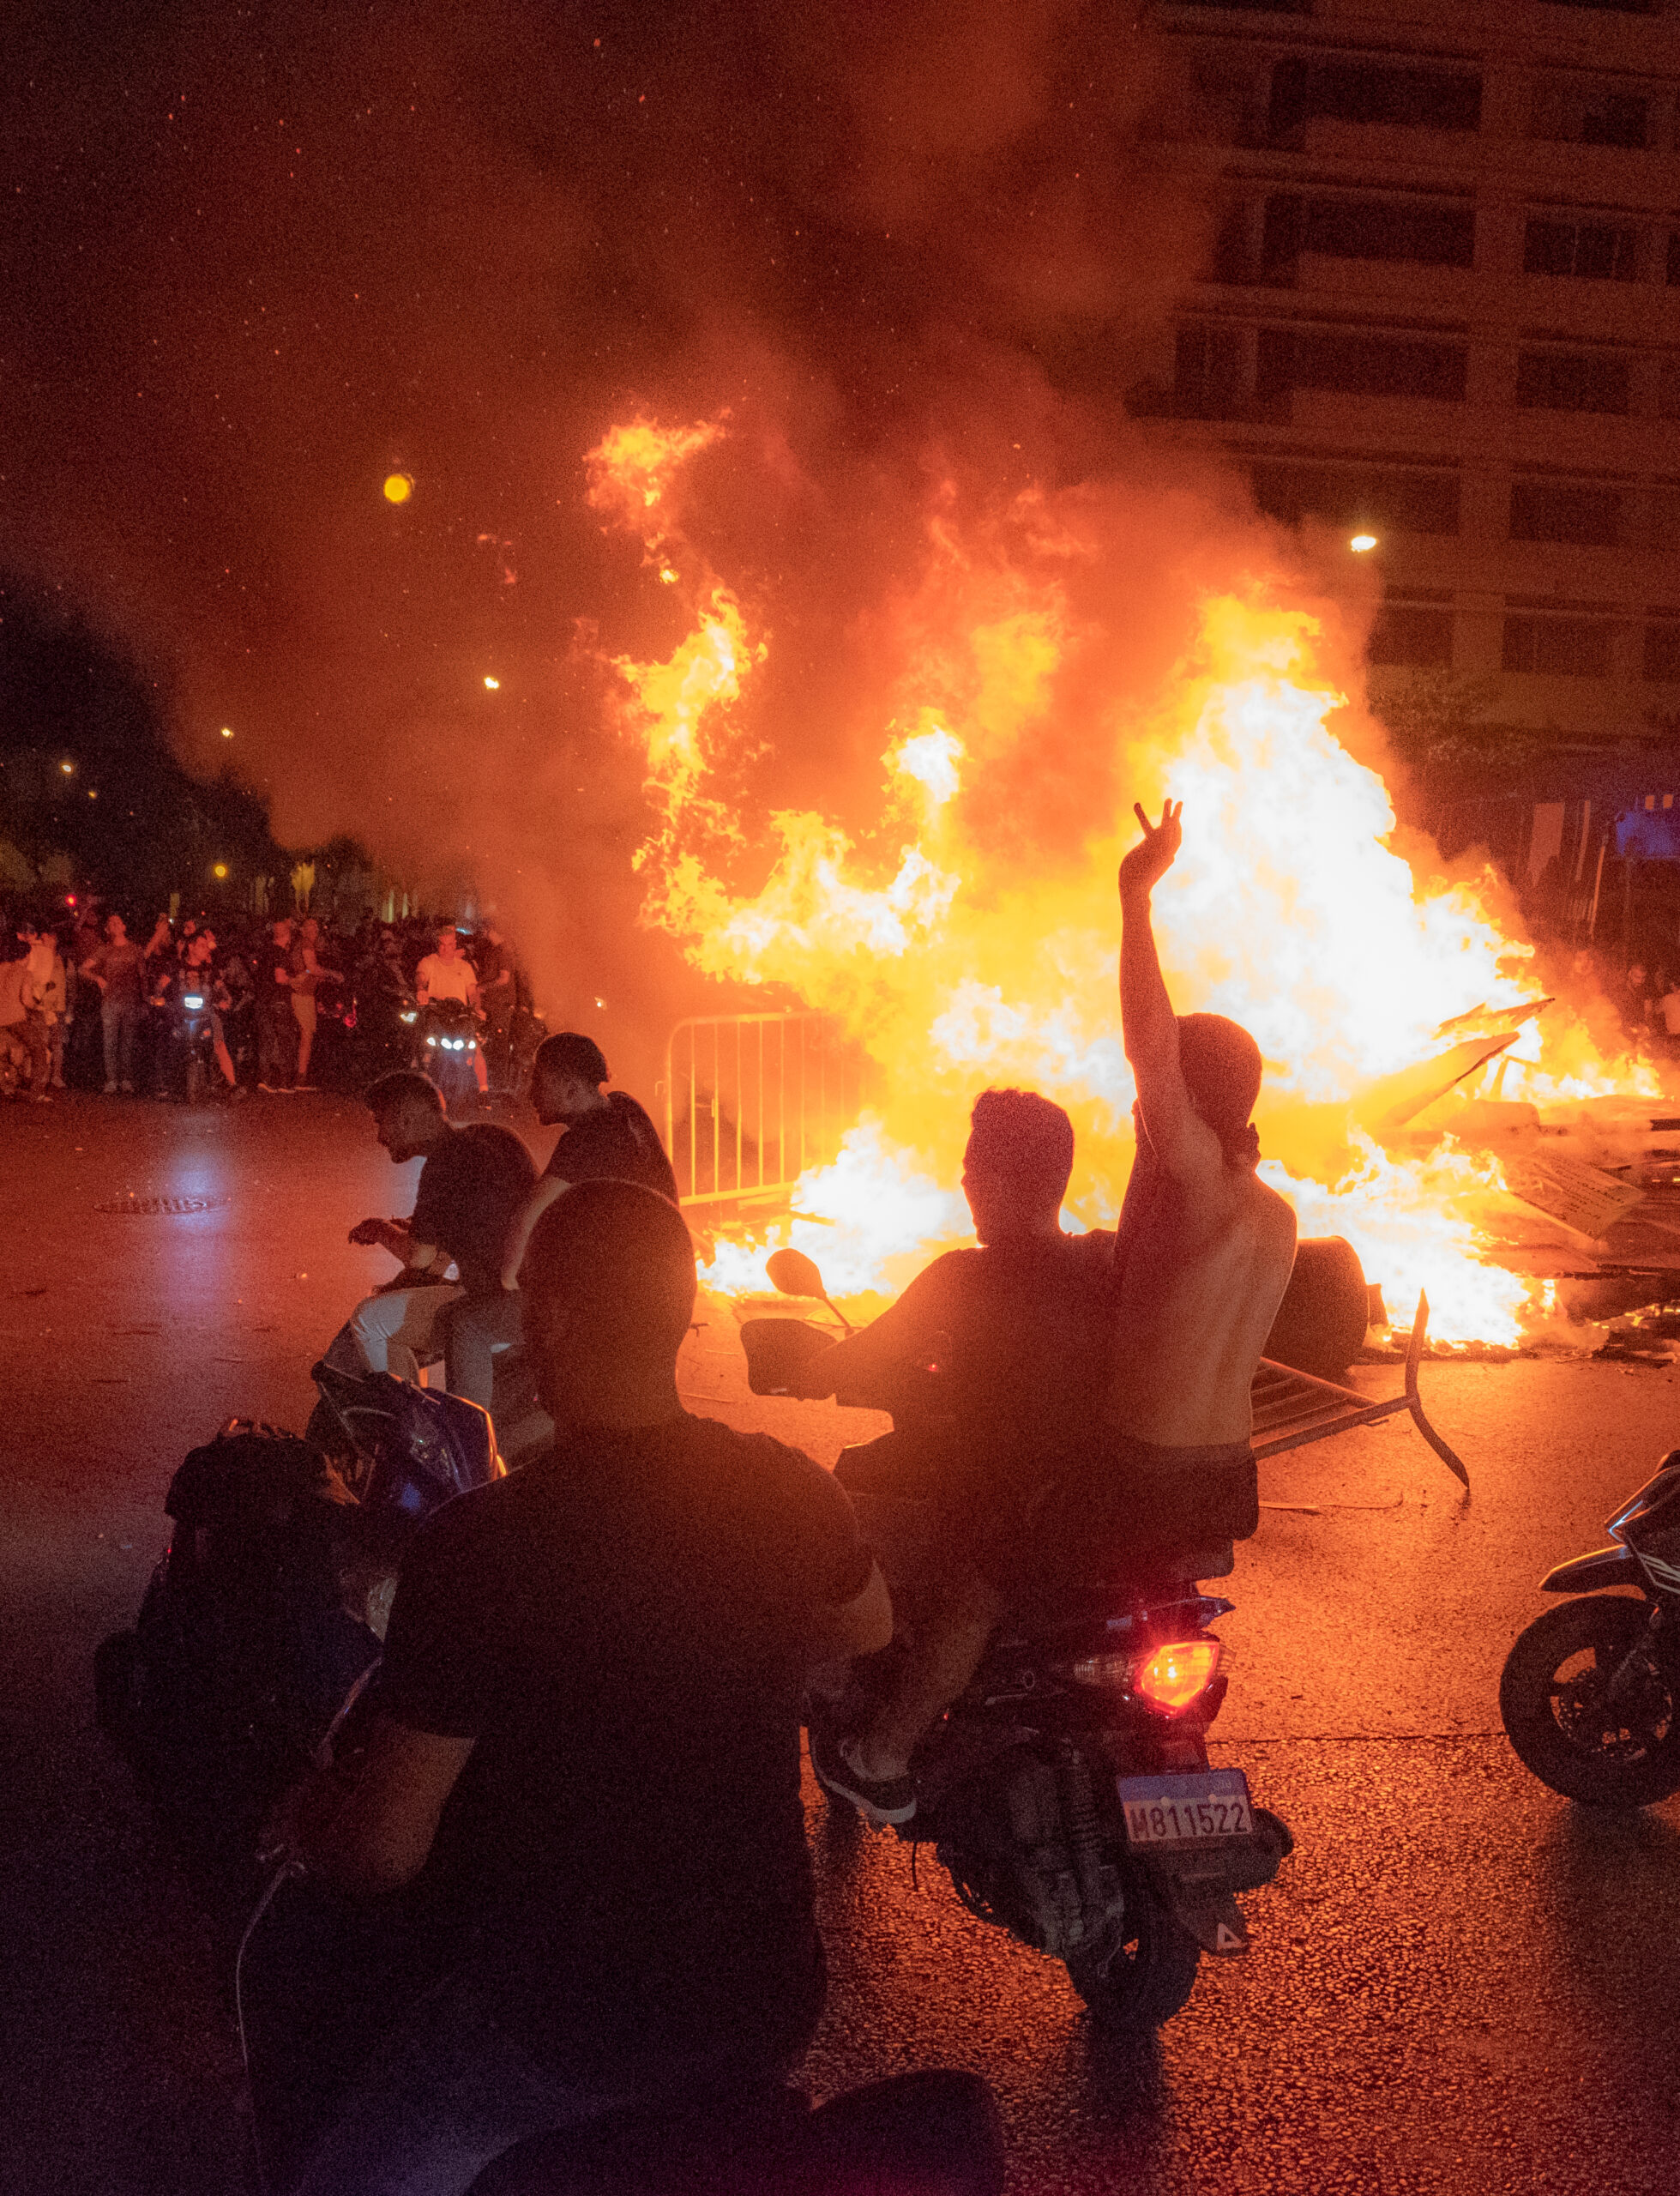 Beeping motorcycles going around the fire pit in Downtown Beirut. 17 October 2019. 